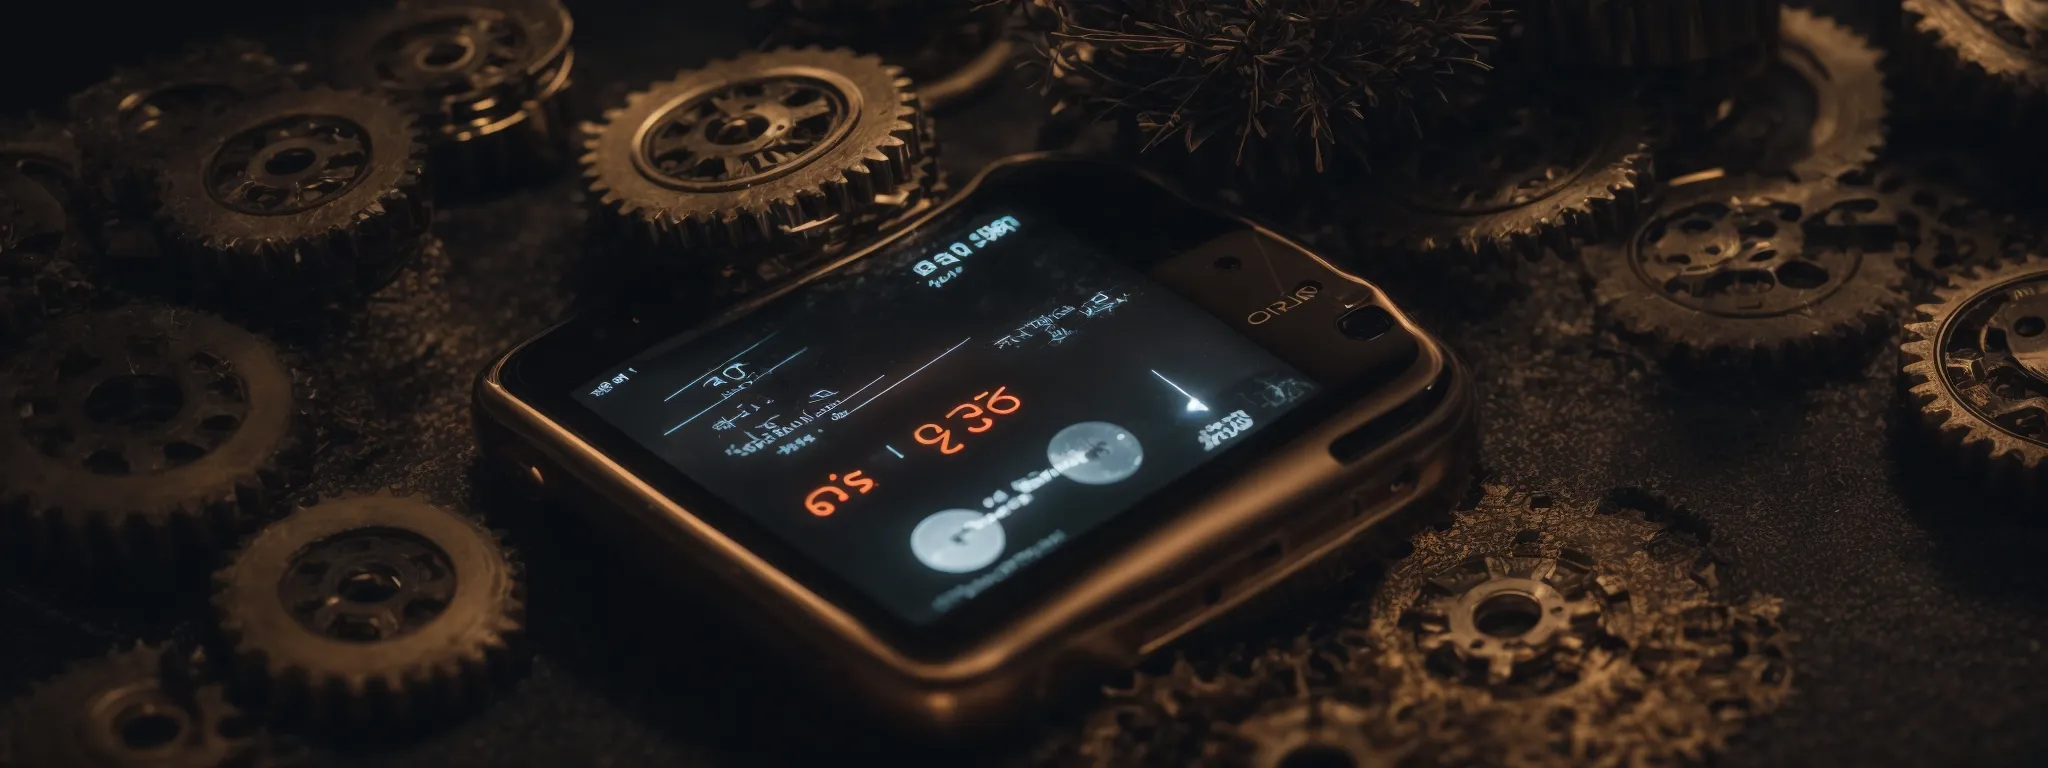 a mobile phone with a growth chart on the screen surrounded by different sized gears, implying the upgrading from basic to advanced optimization tools.